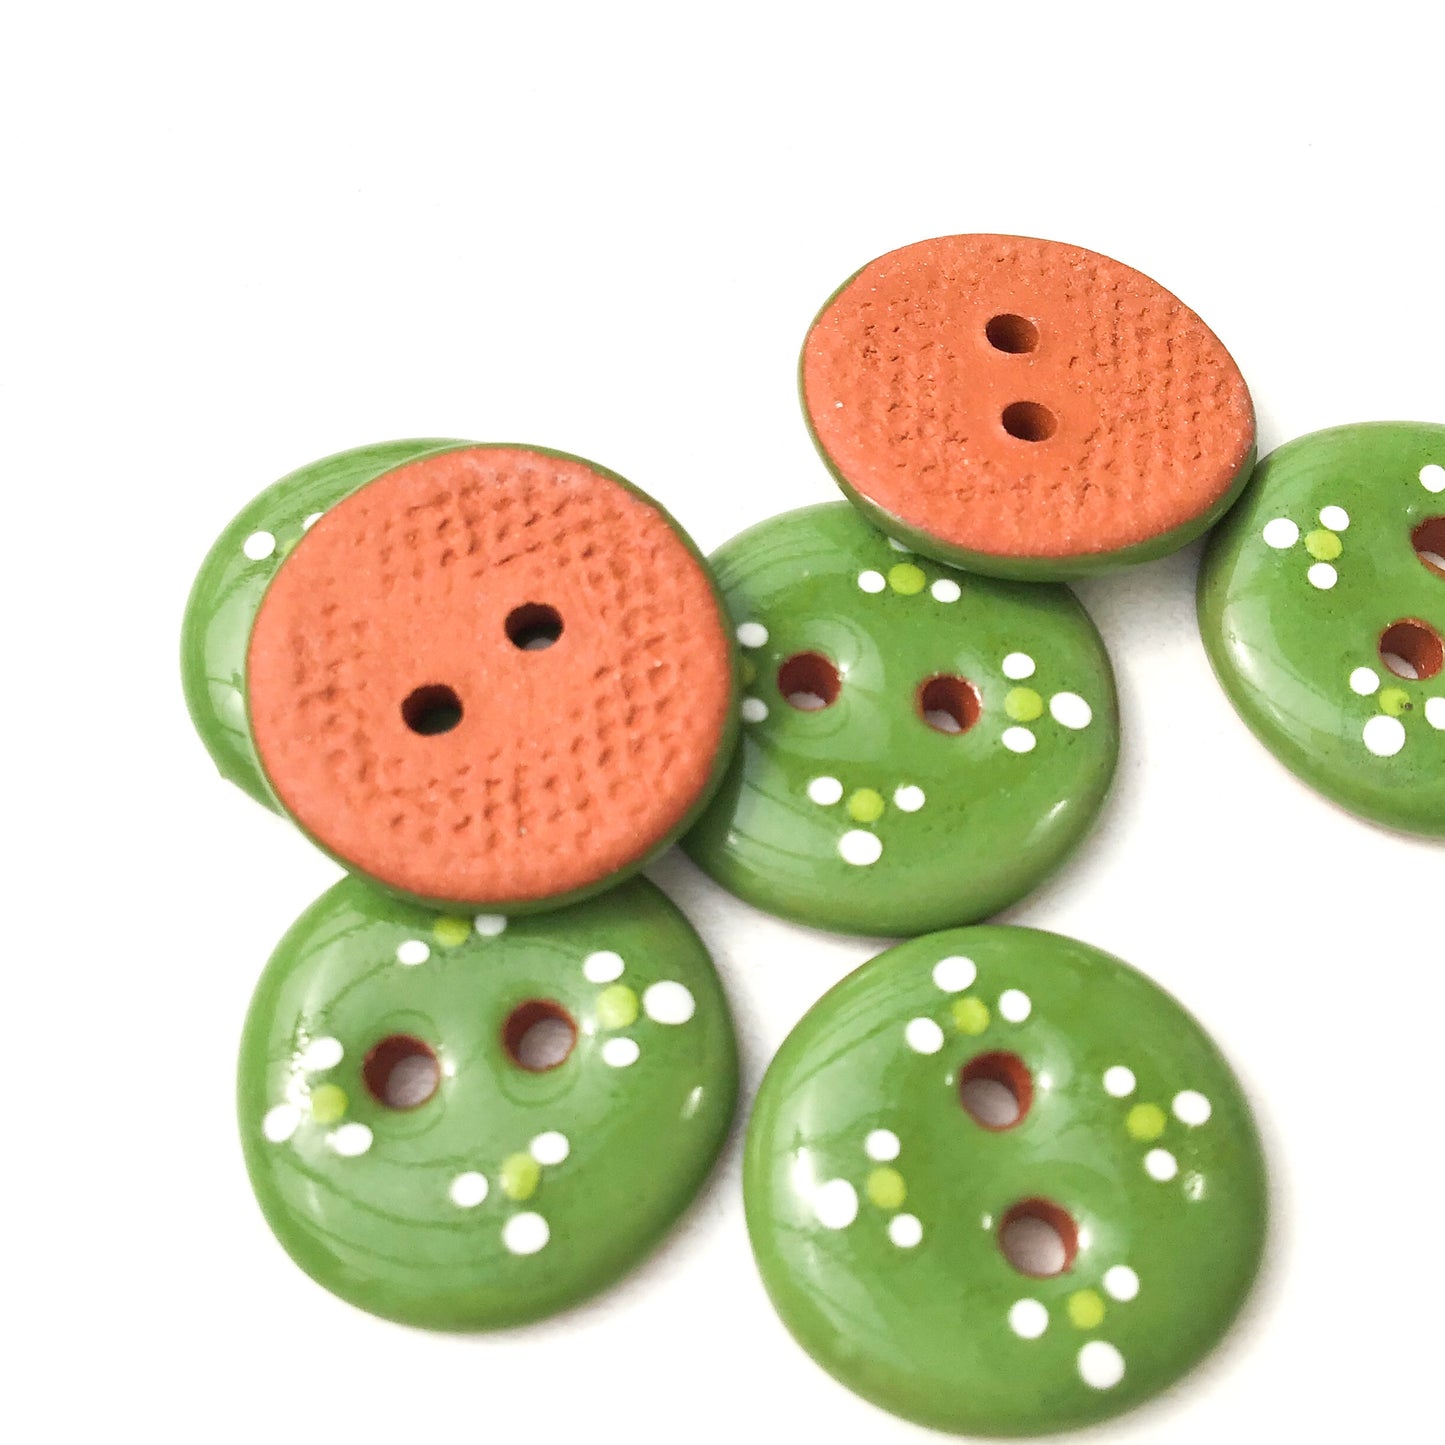 Shamrock Green Decorative Ceramic Buttons - Green Clay Buttons - 11/16" - 7 Pack